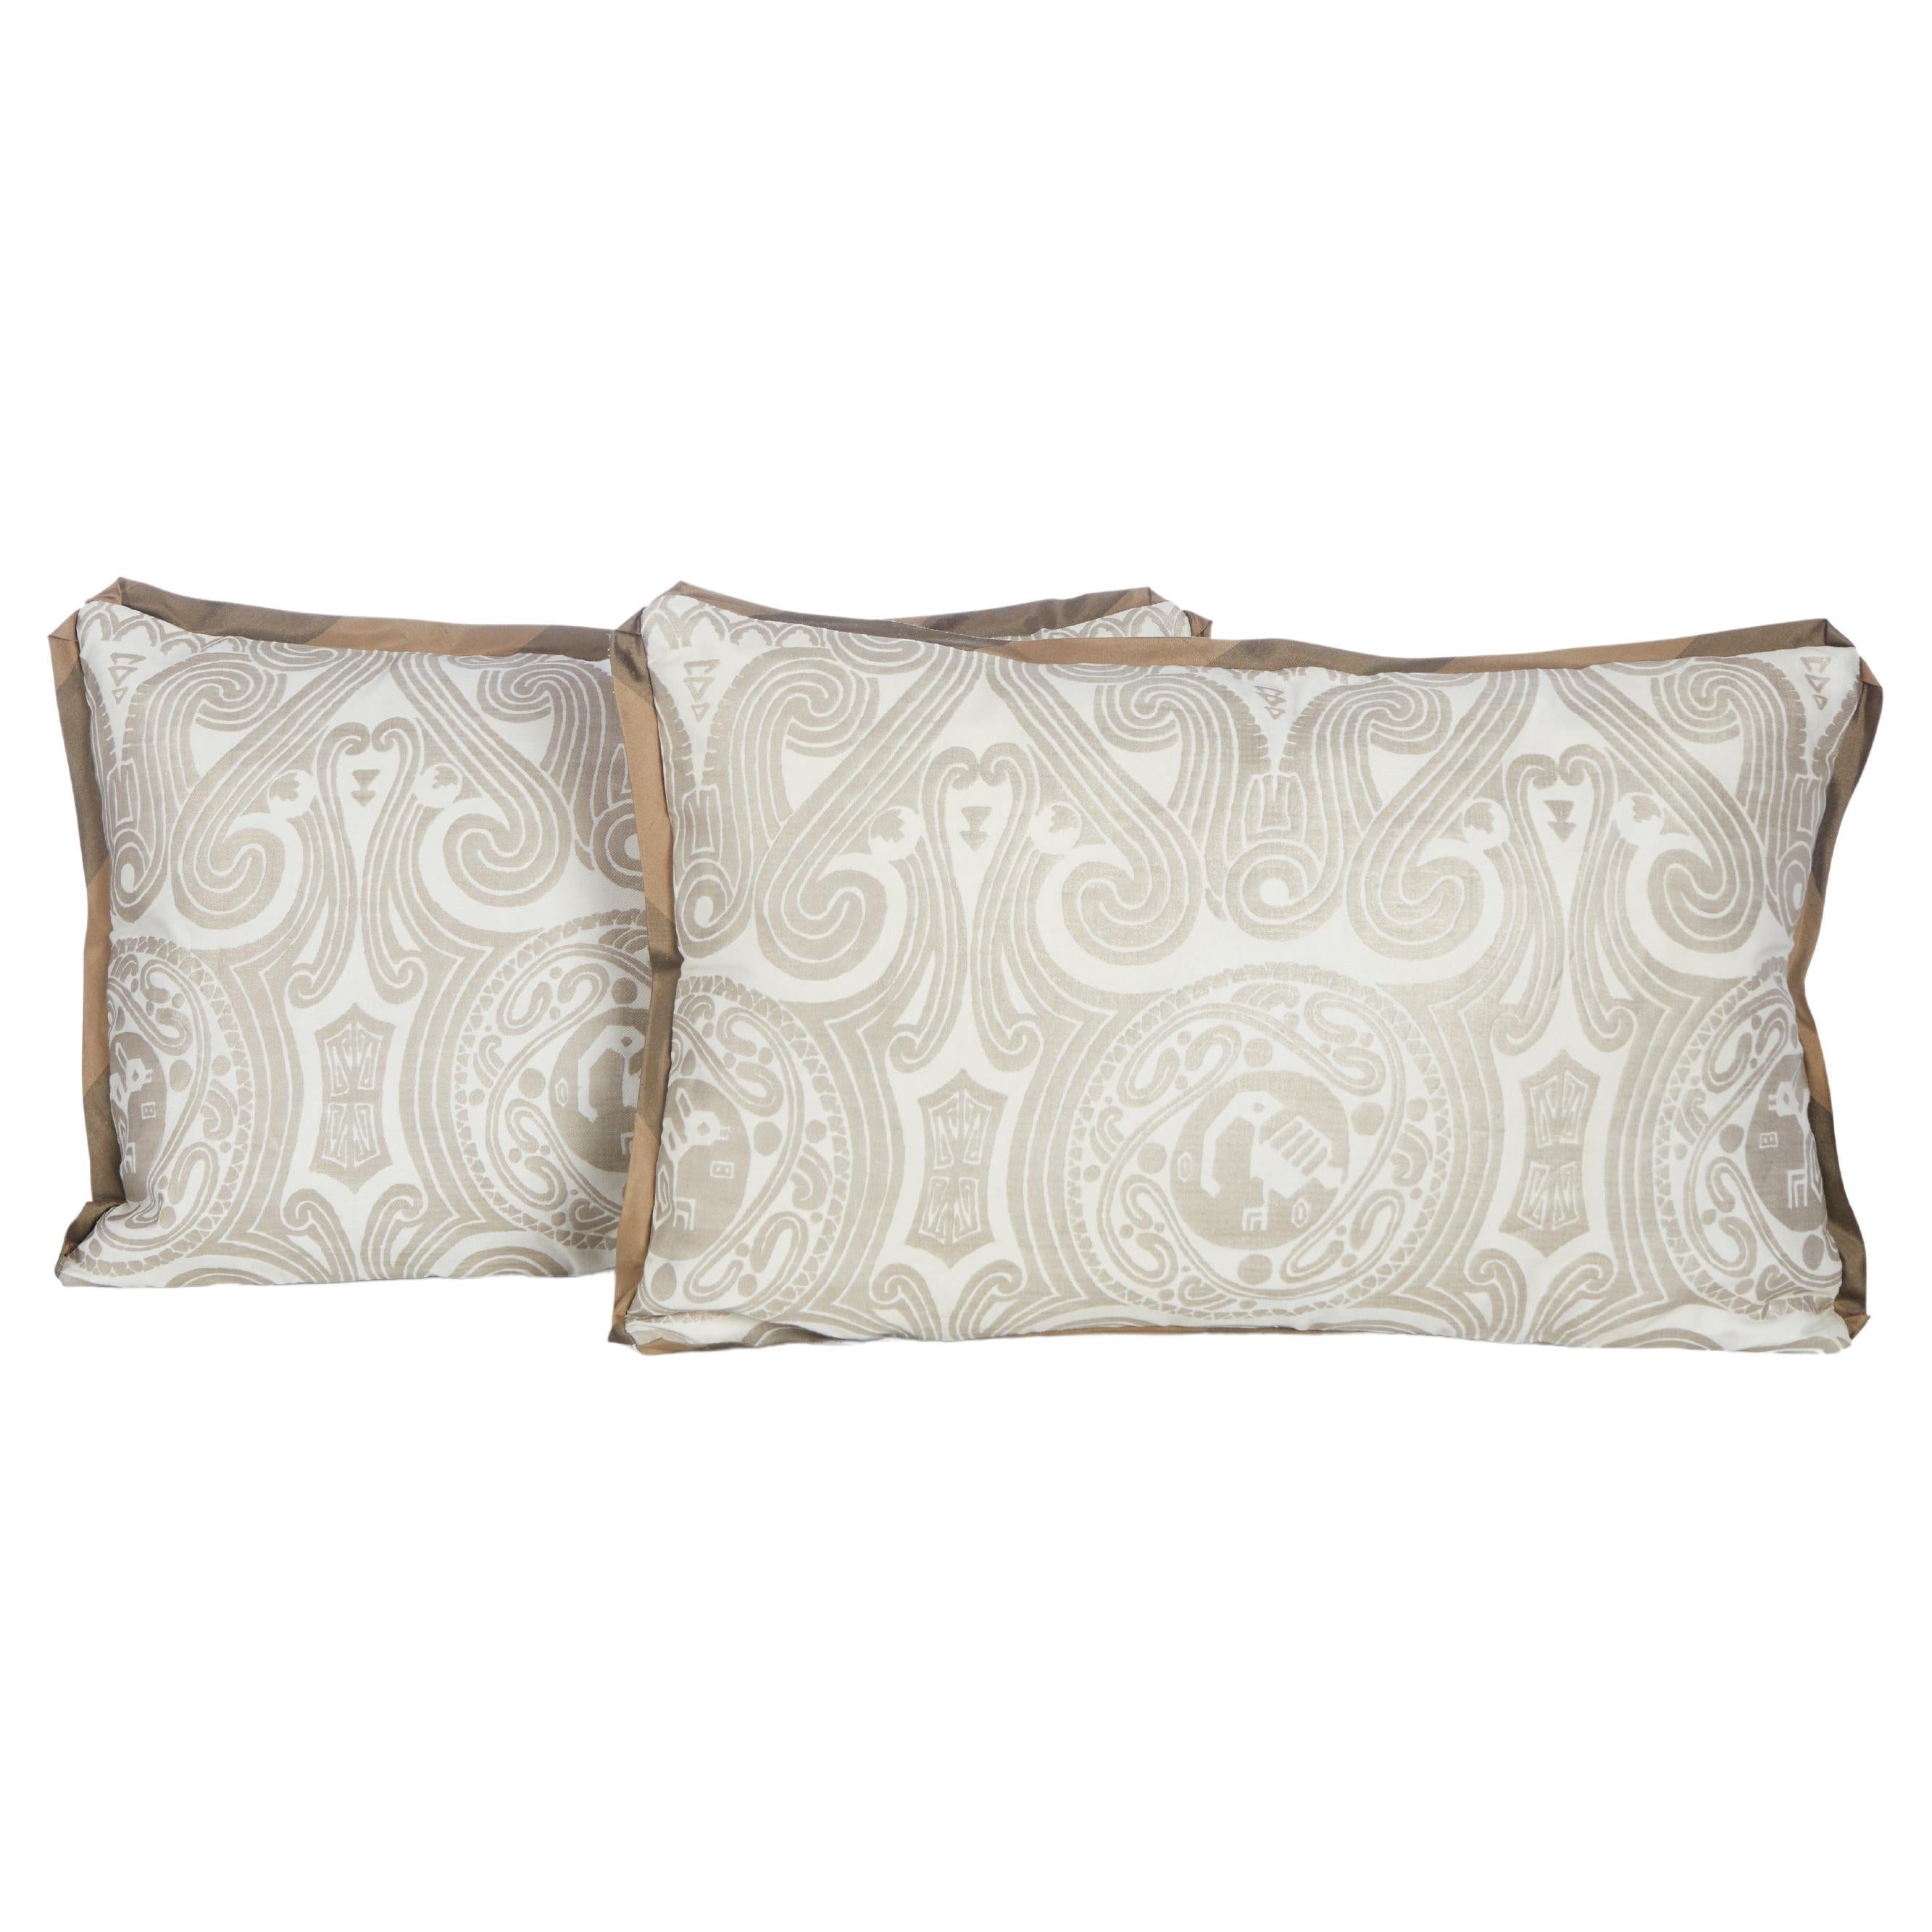 Pair of Fortuny Peruviano Lumbar Cushions Ion Silvery Gold on White David Duncan